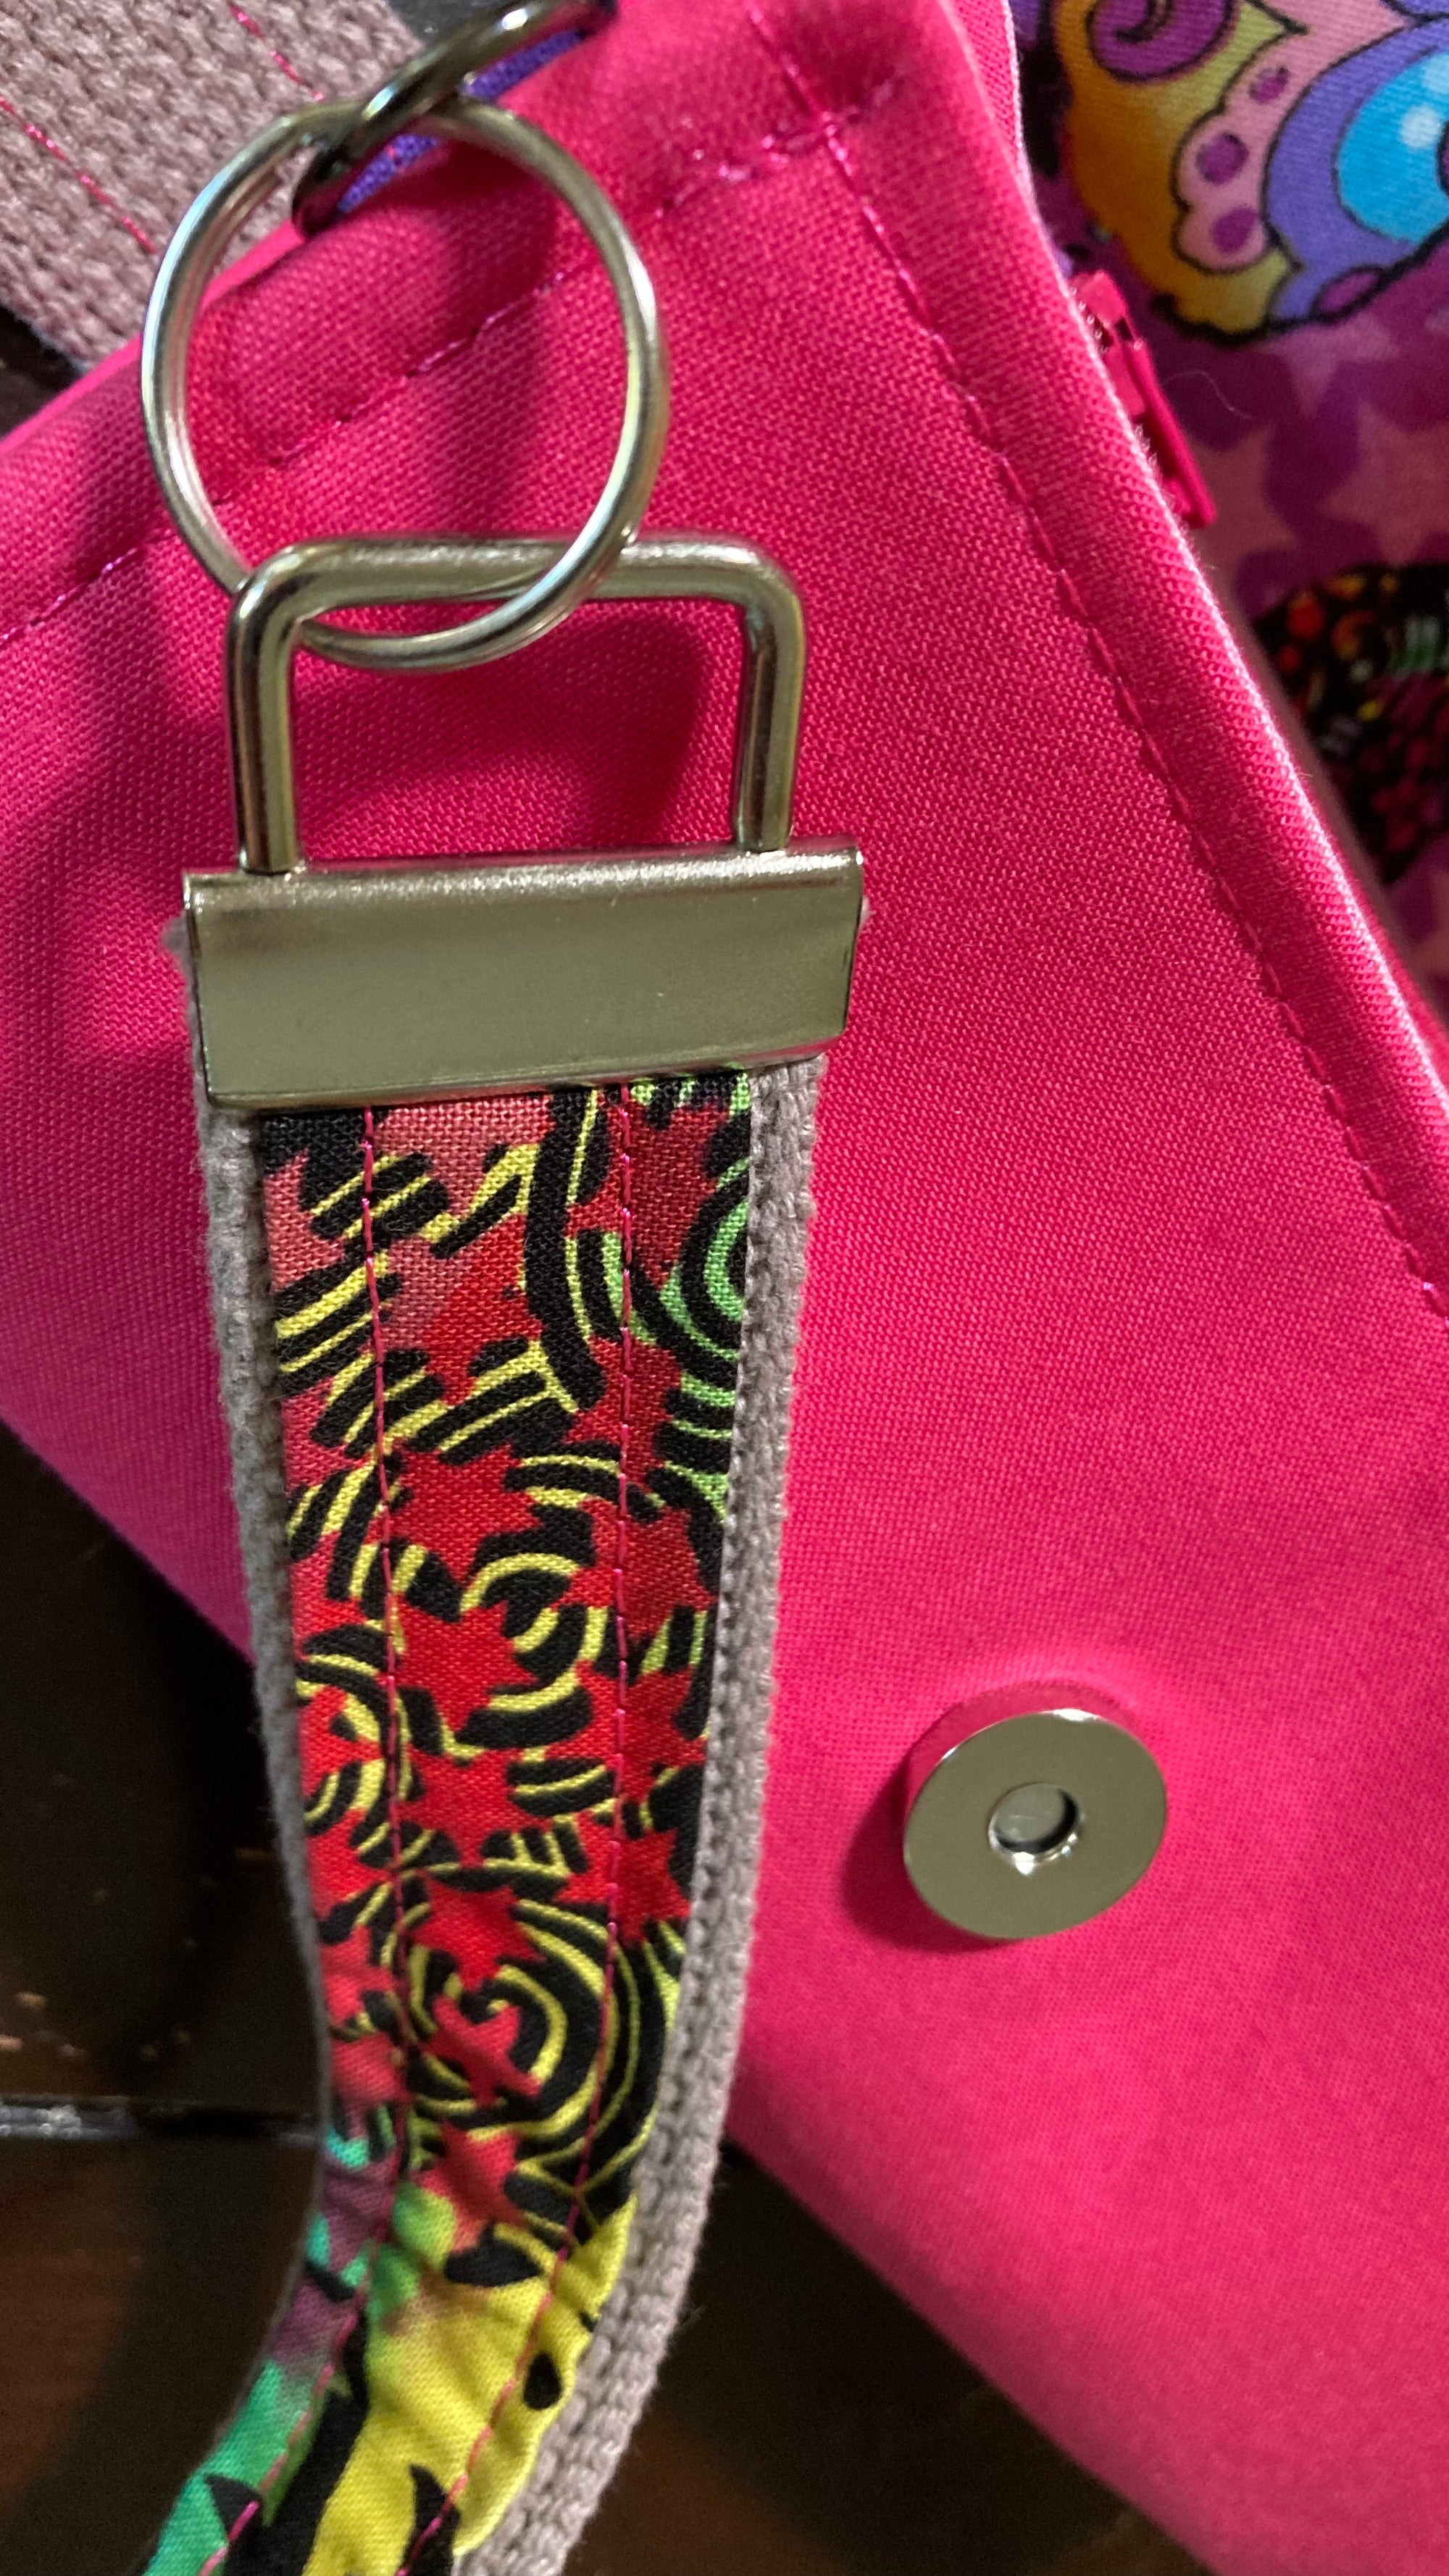 1 (25 mm) Key Fob Hardware with Split Rings for Wristlets, Dog Leash – I  Like Big Buttons!